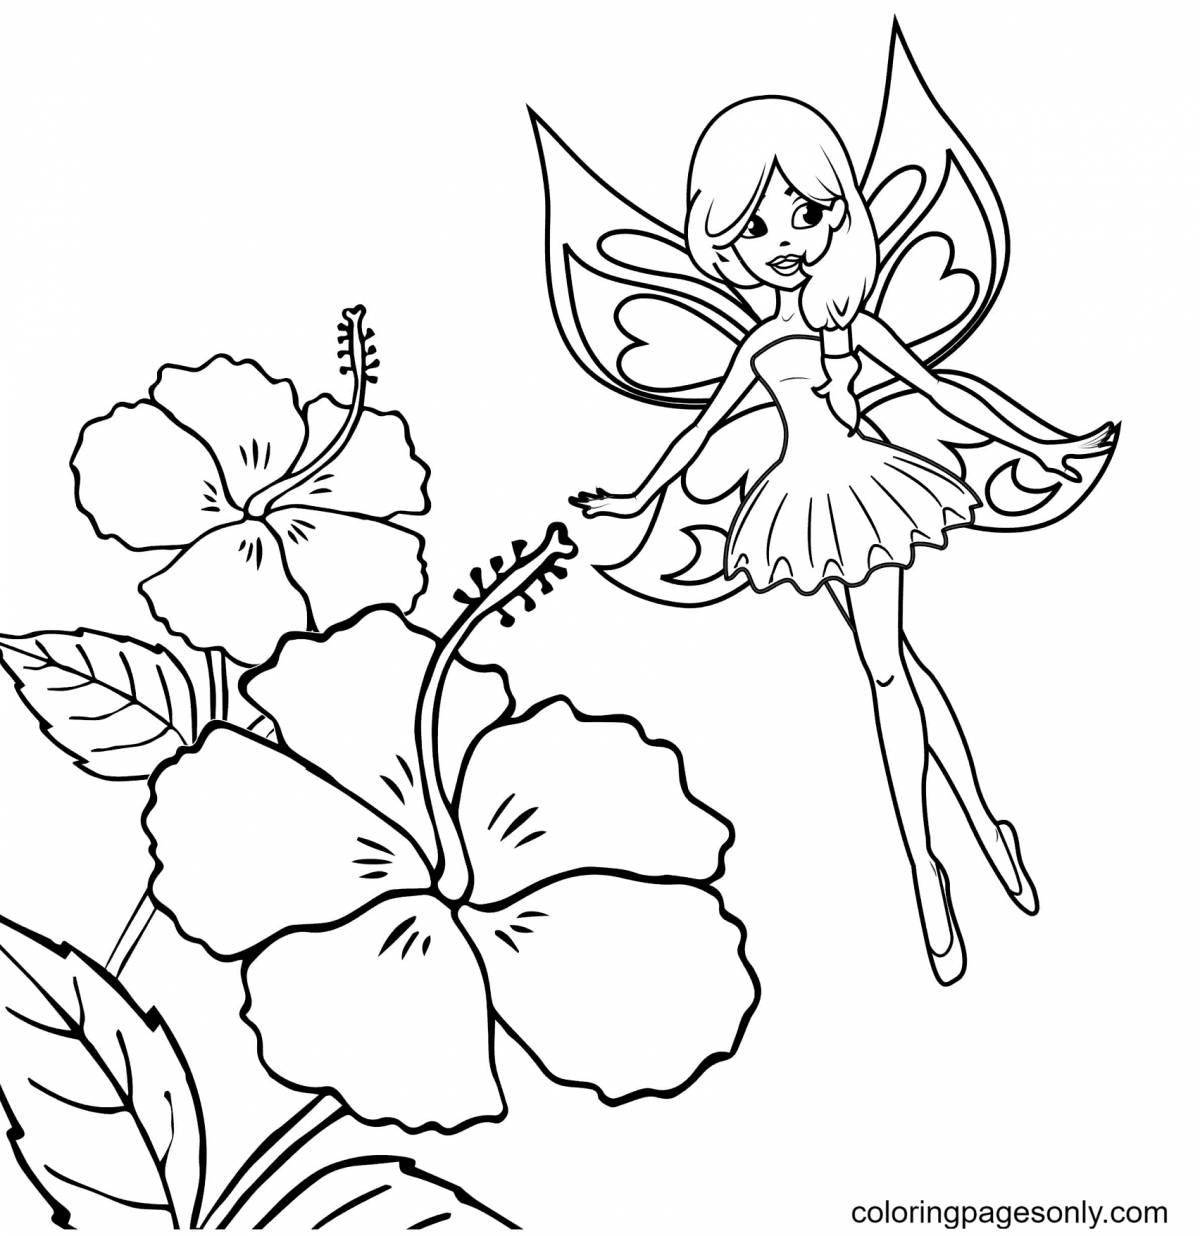 Adorable flower fairy coloring book